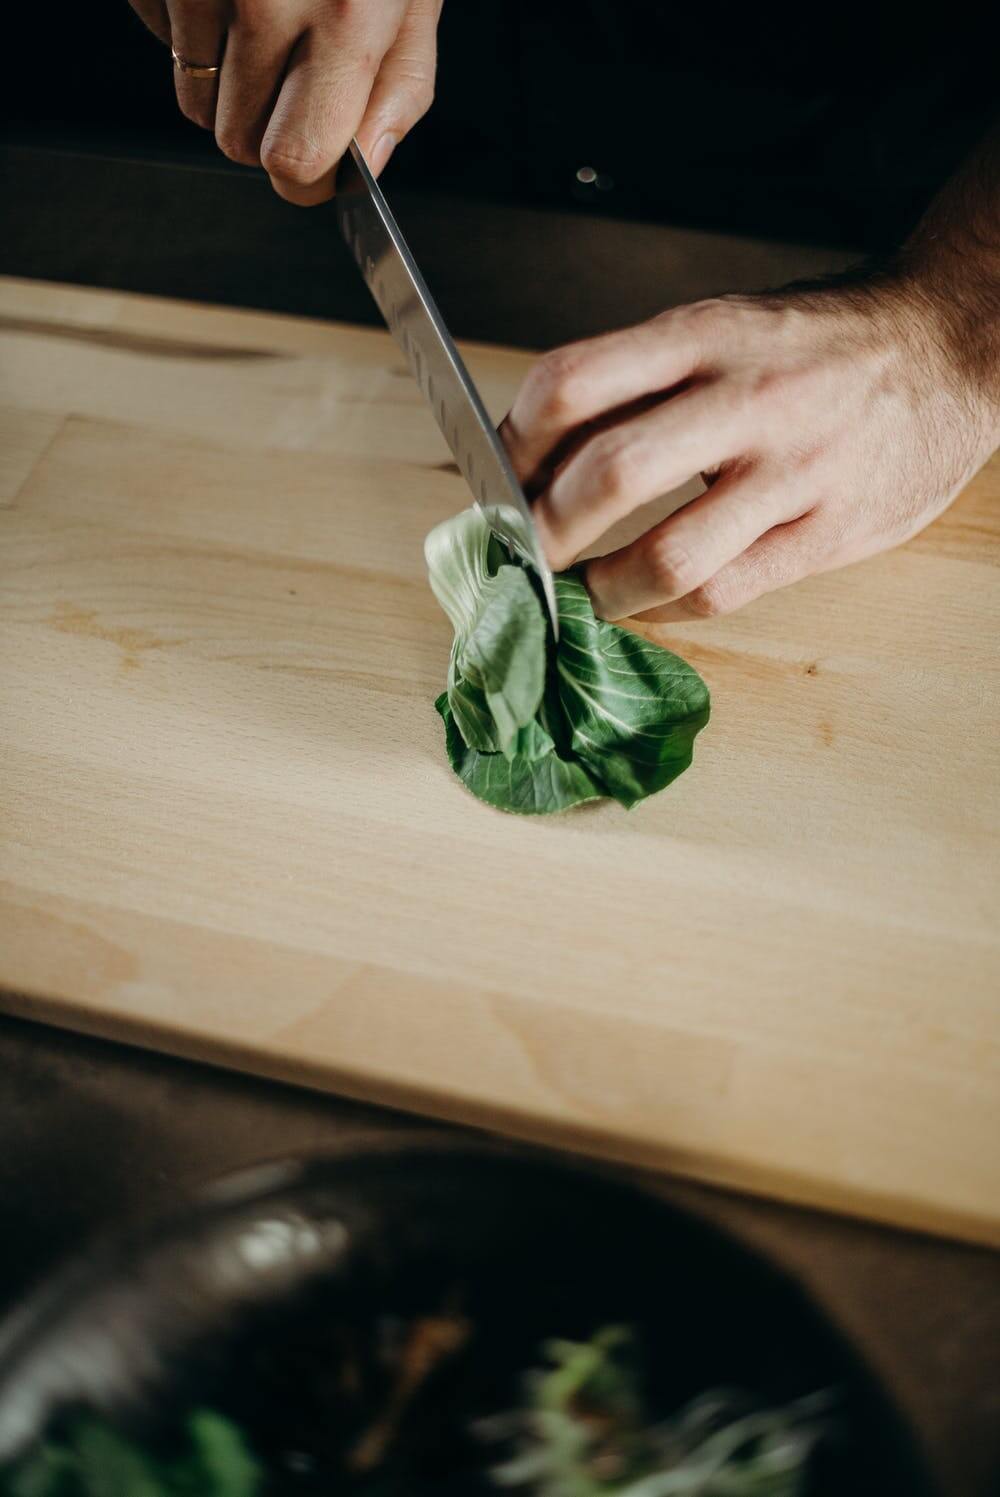 Hands holding a knife cutting bok choy